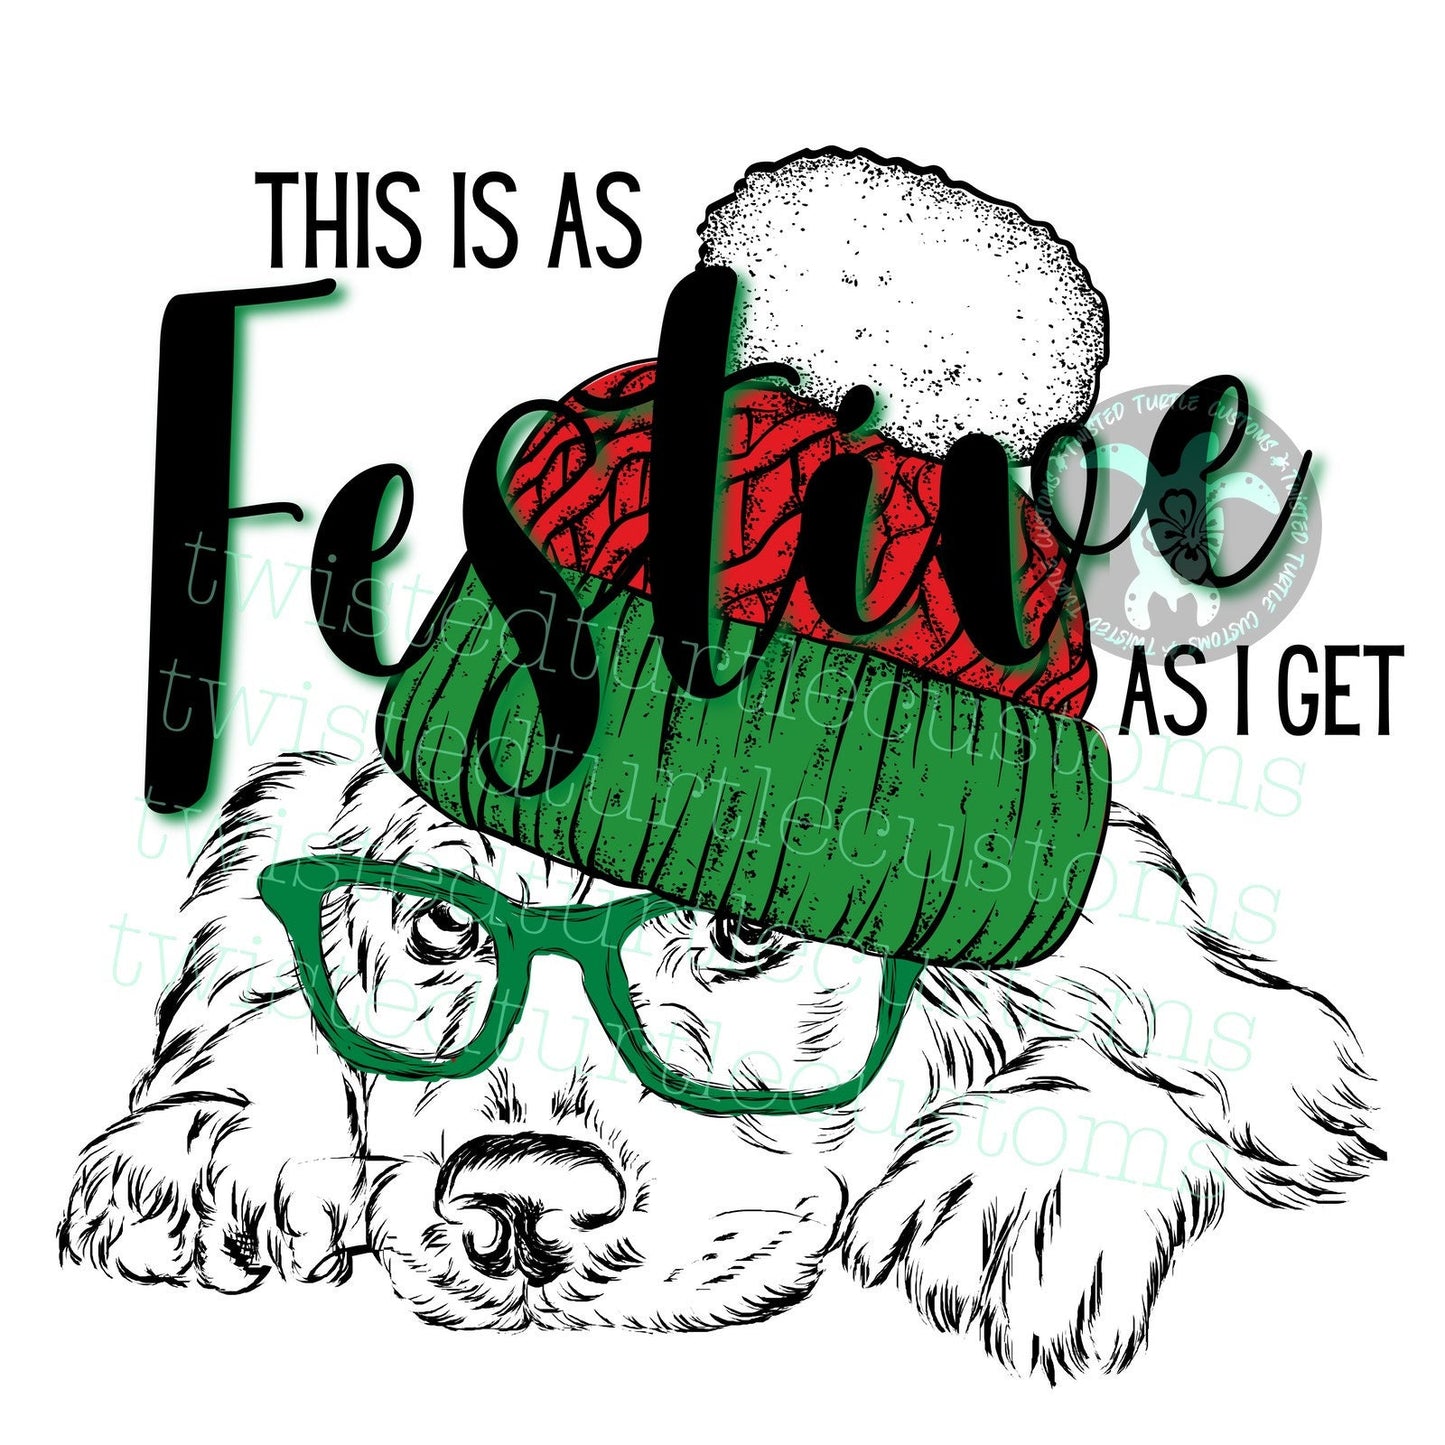 A "This is as Festive as I get" Christmas Dog/Puppy in Knit Hat and Glasses *DIGITAL DOWNLOAD Only*